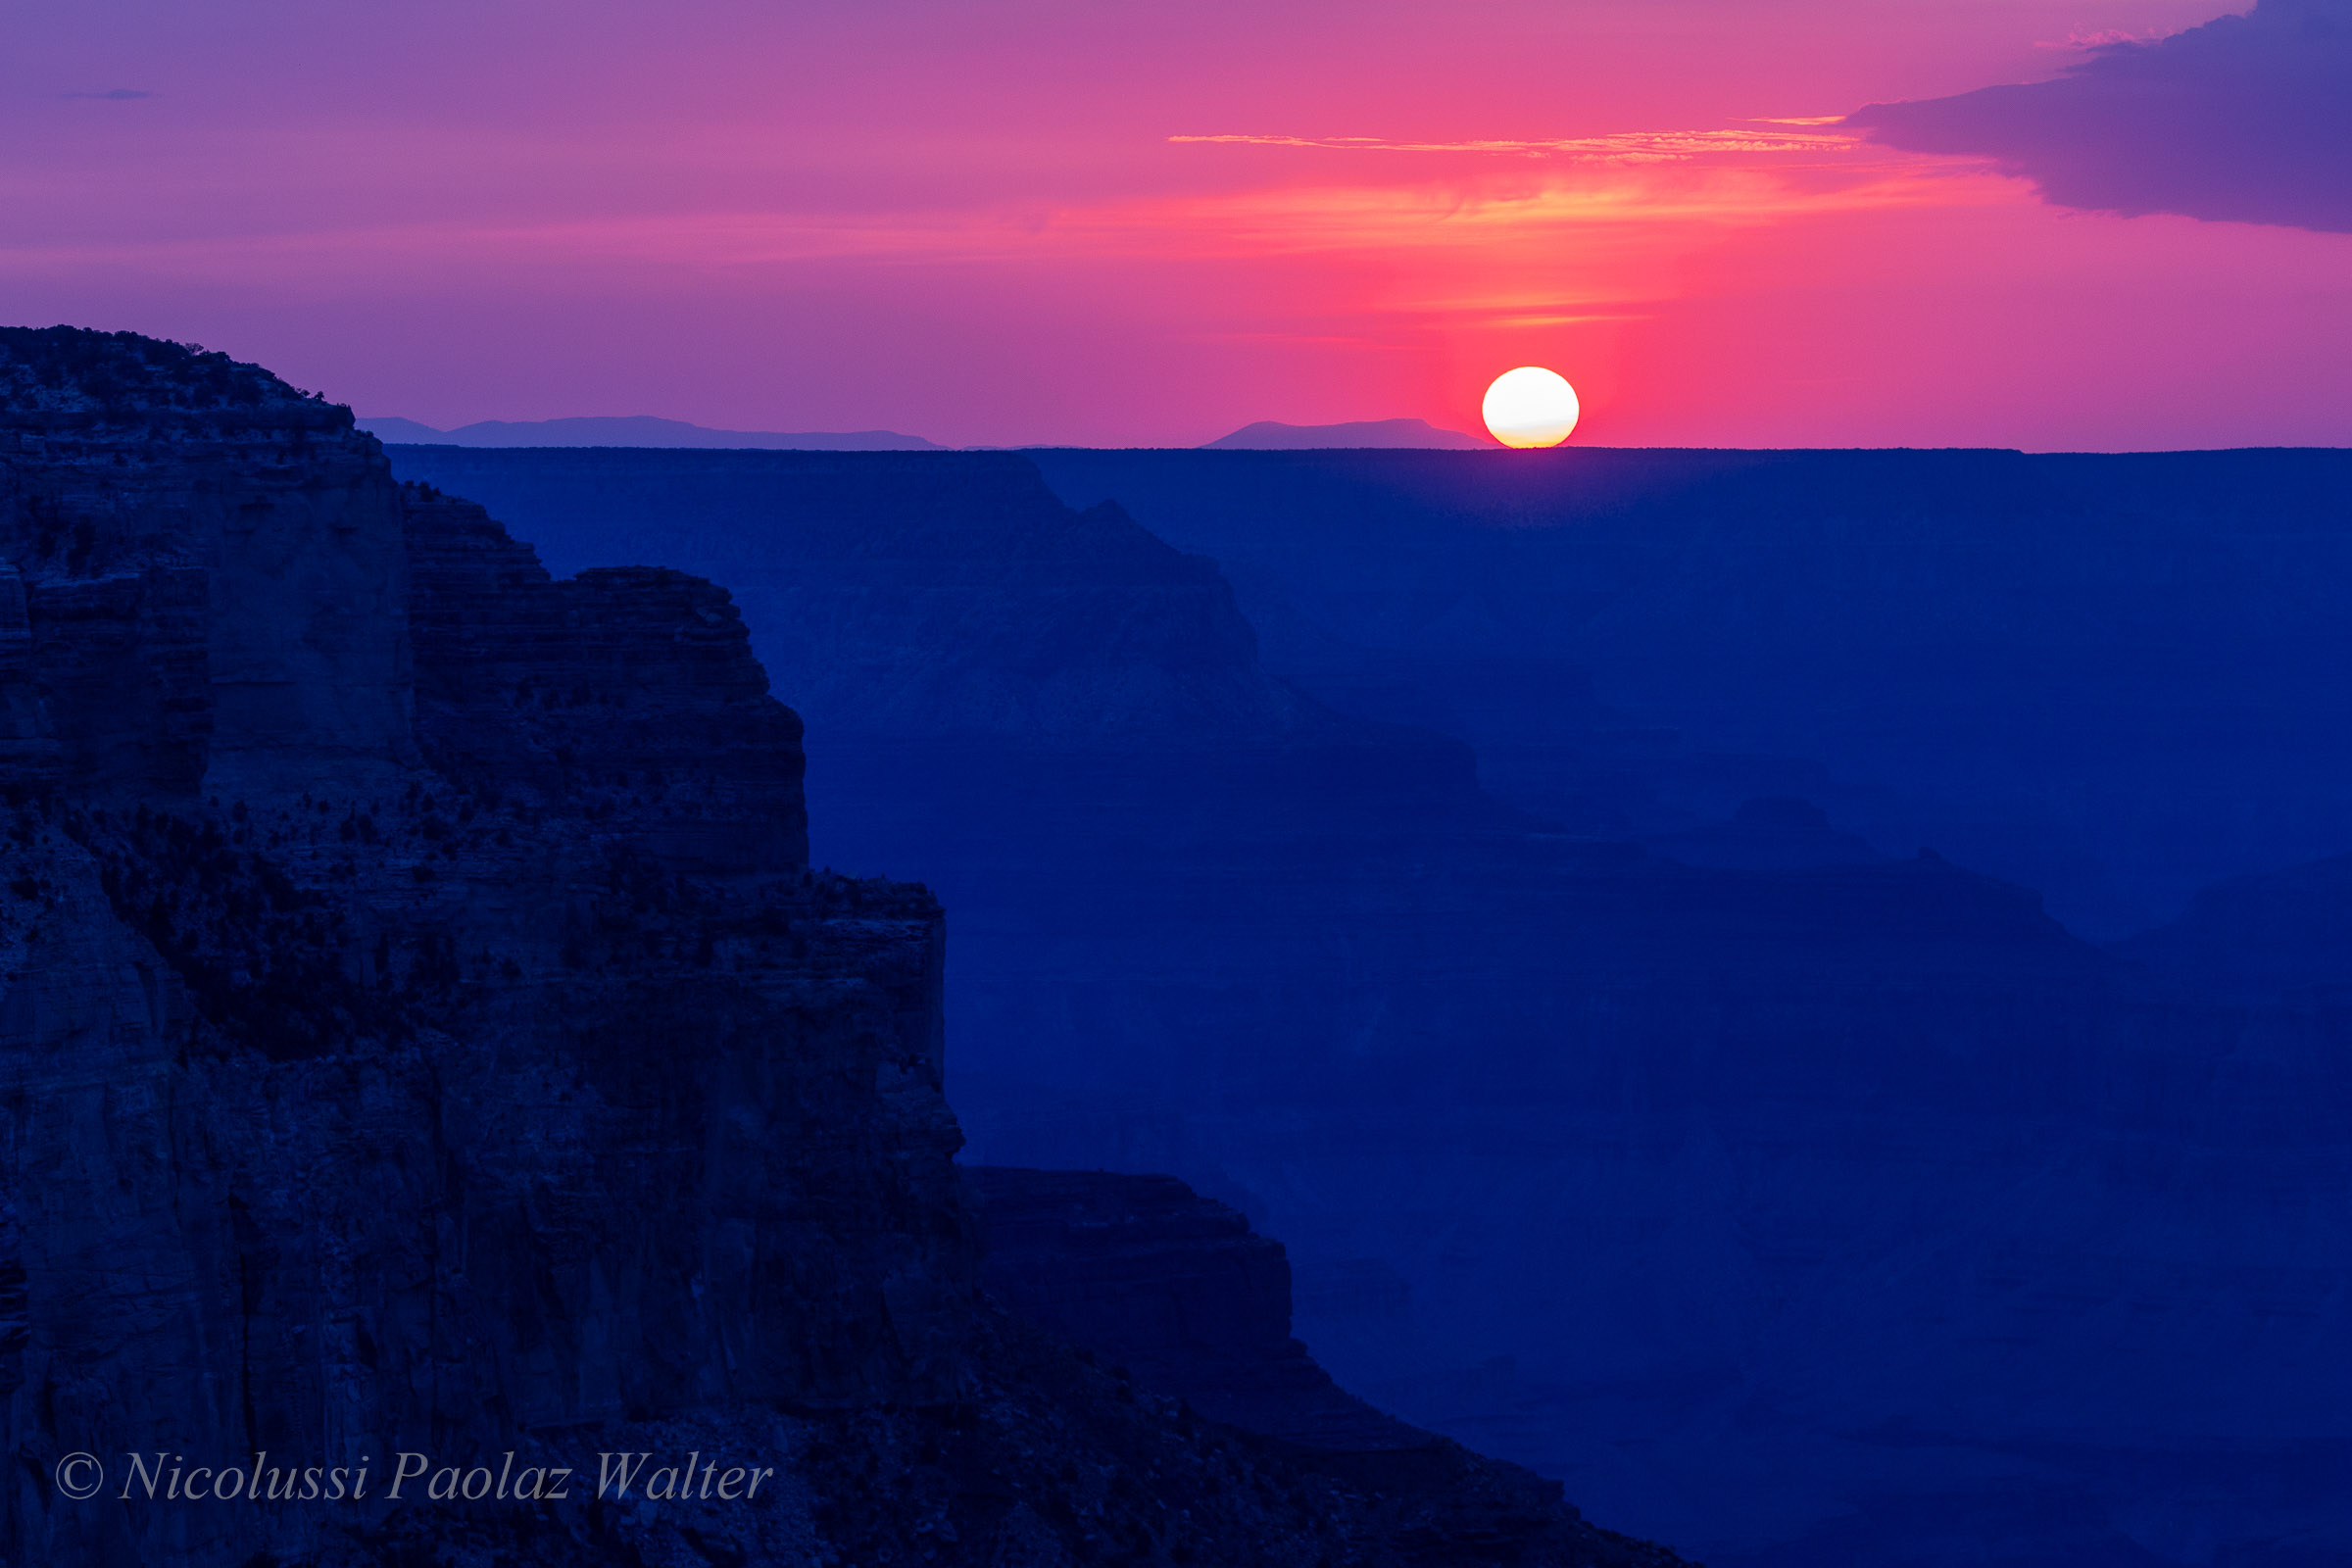 Sunset at the Grand Canyon...